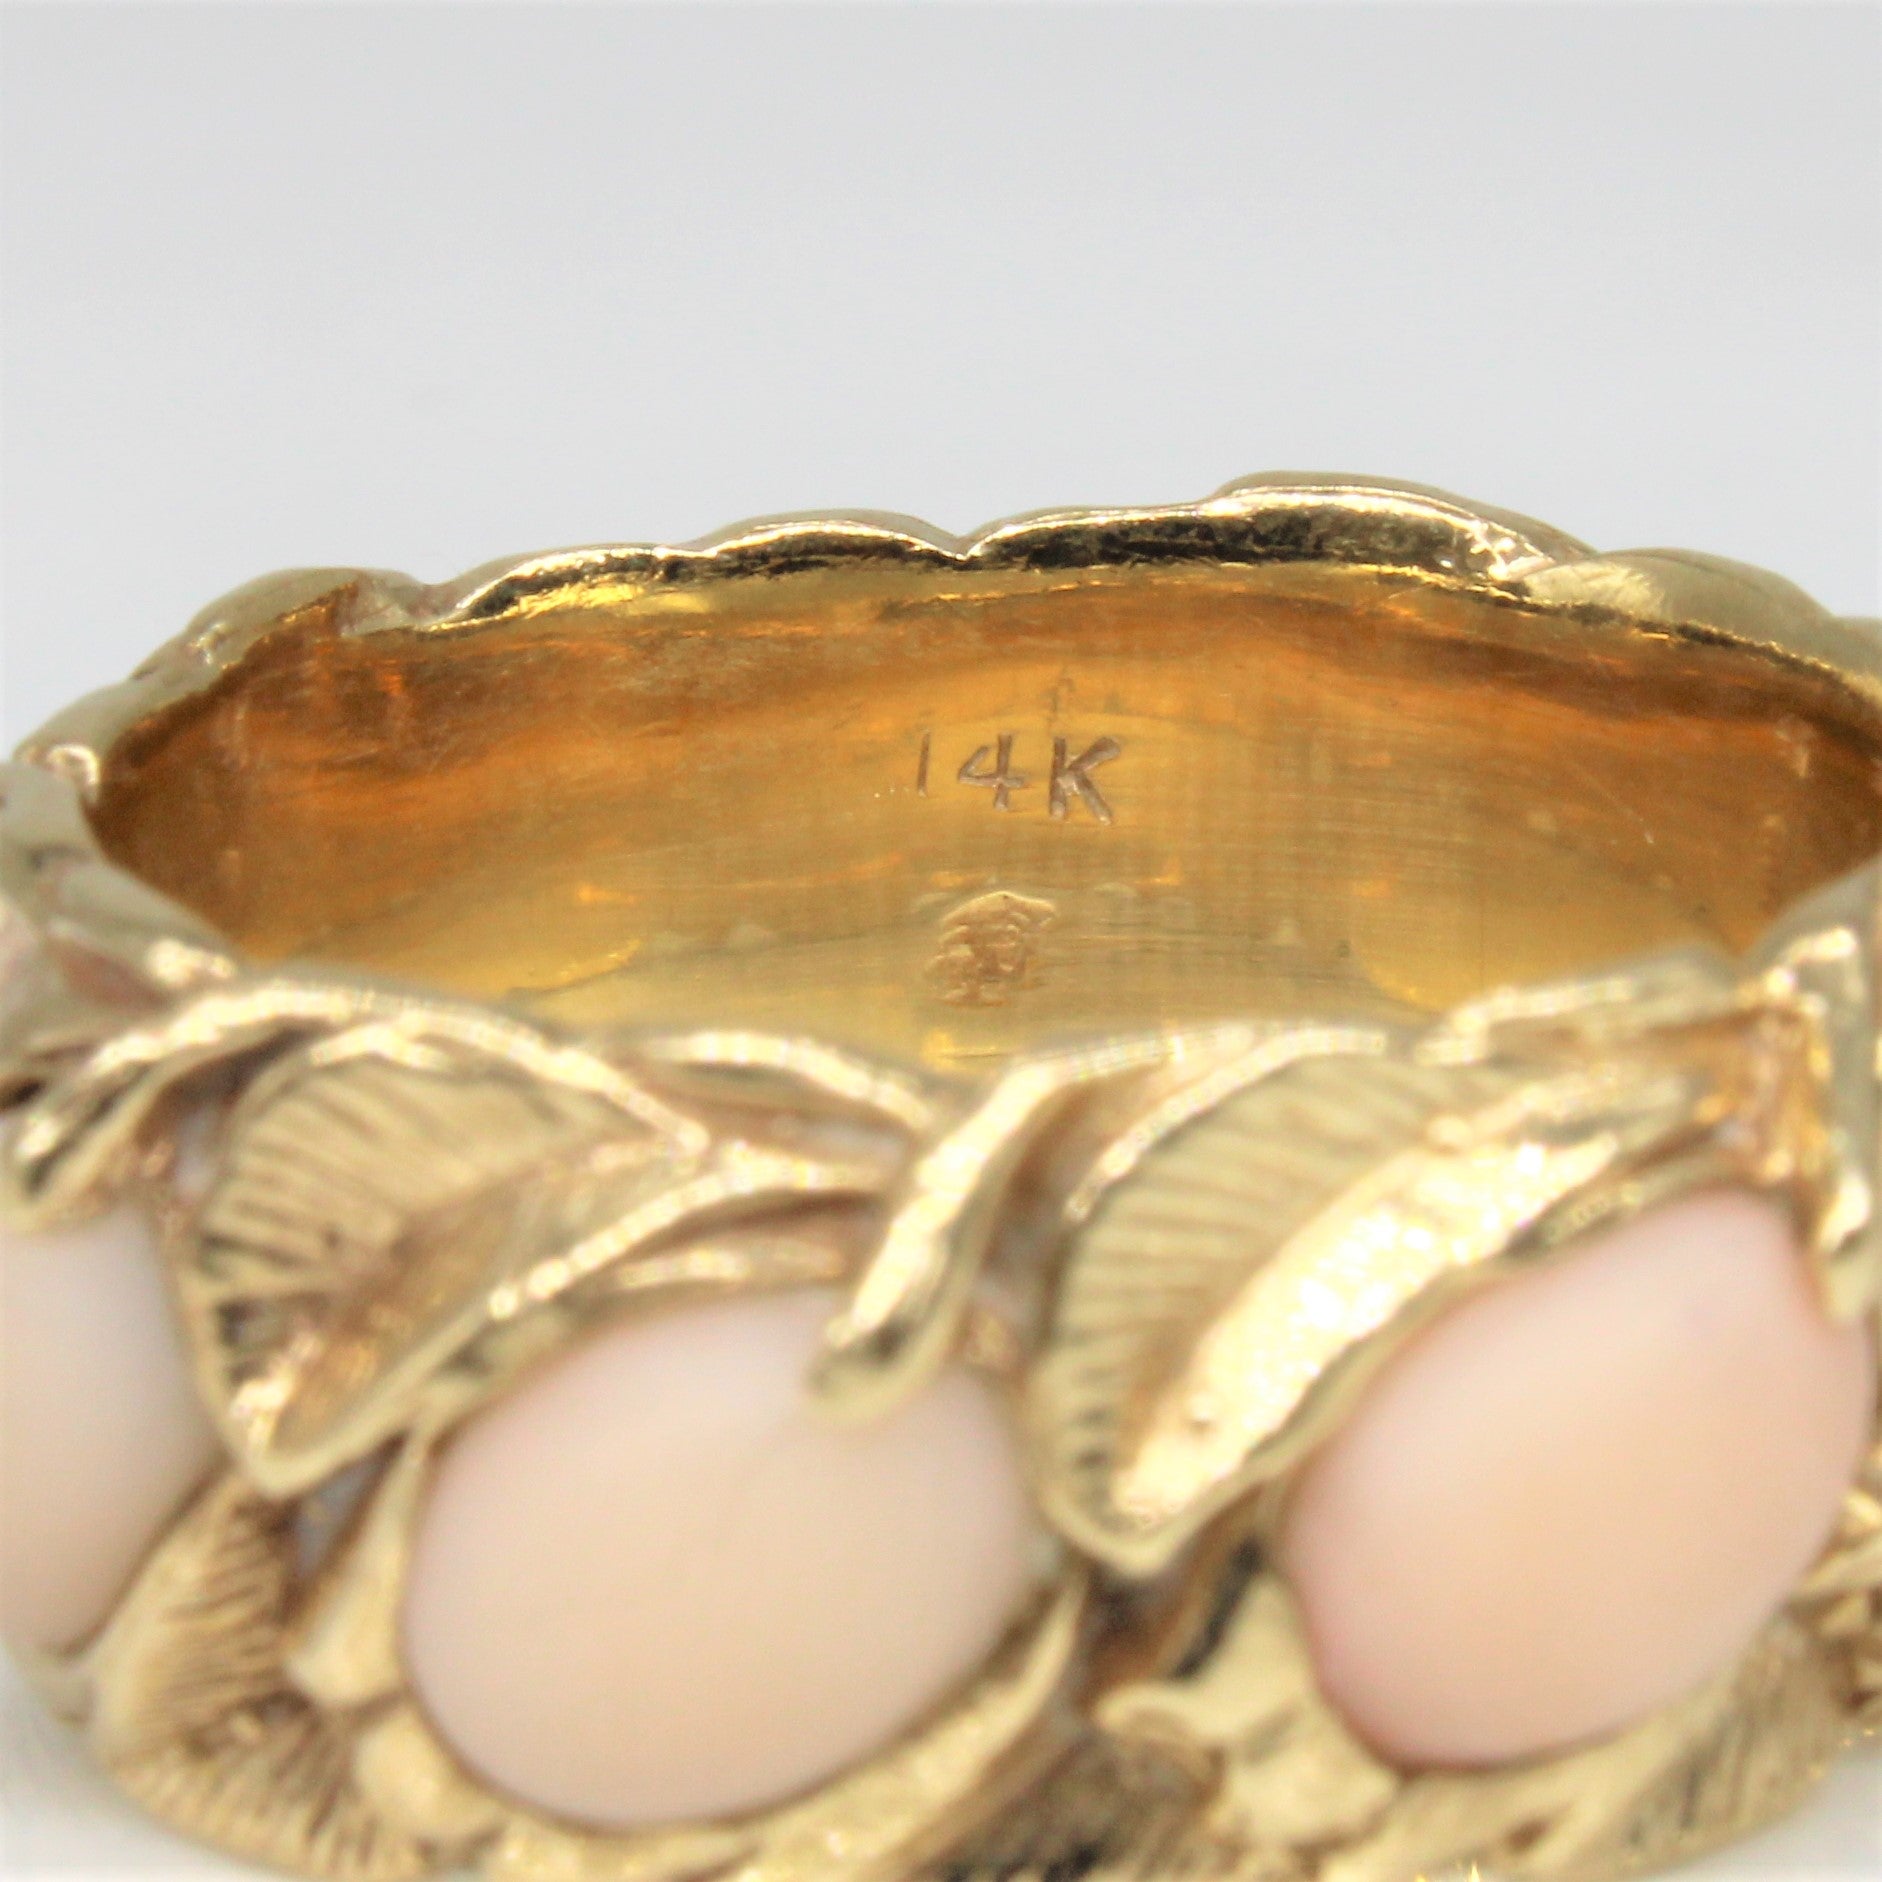 1950s Coral Cabochon Leaf Patterned Ring | 3.50ctw | SZ 9 |